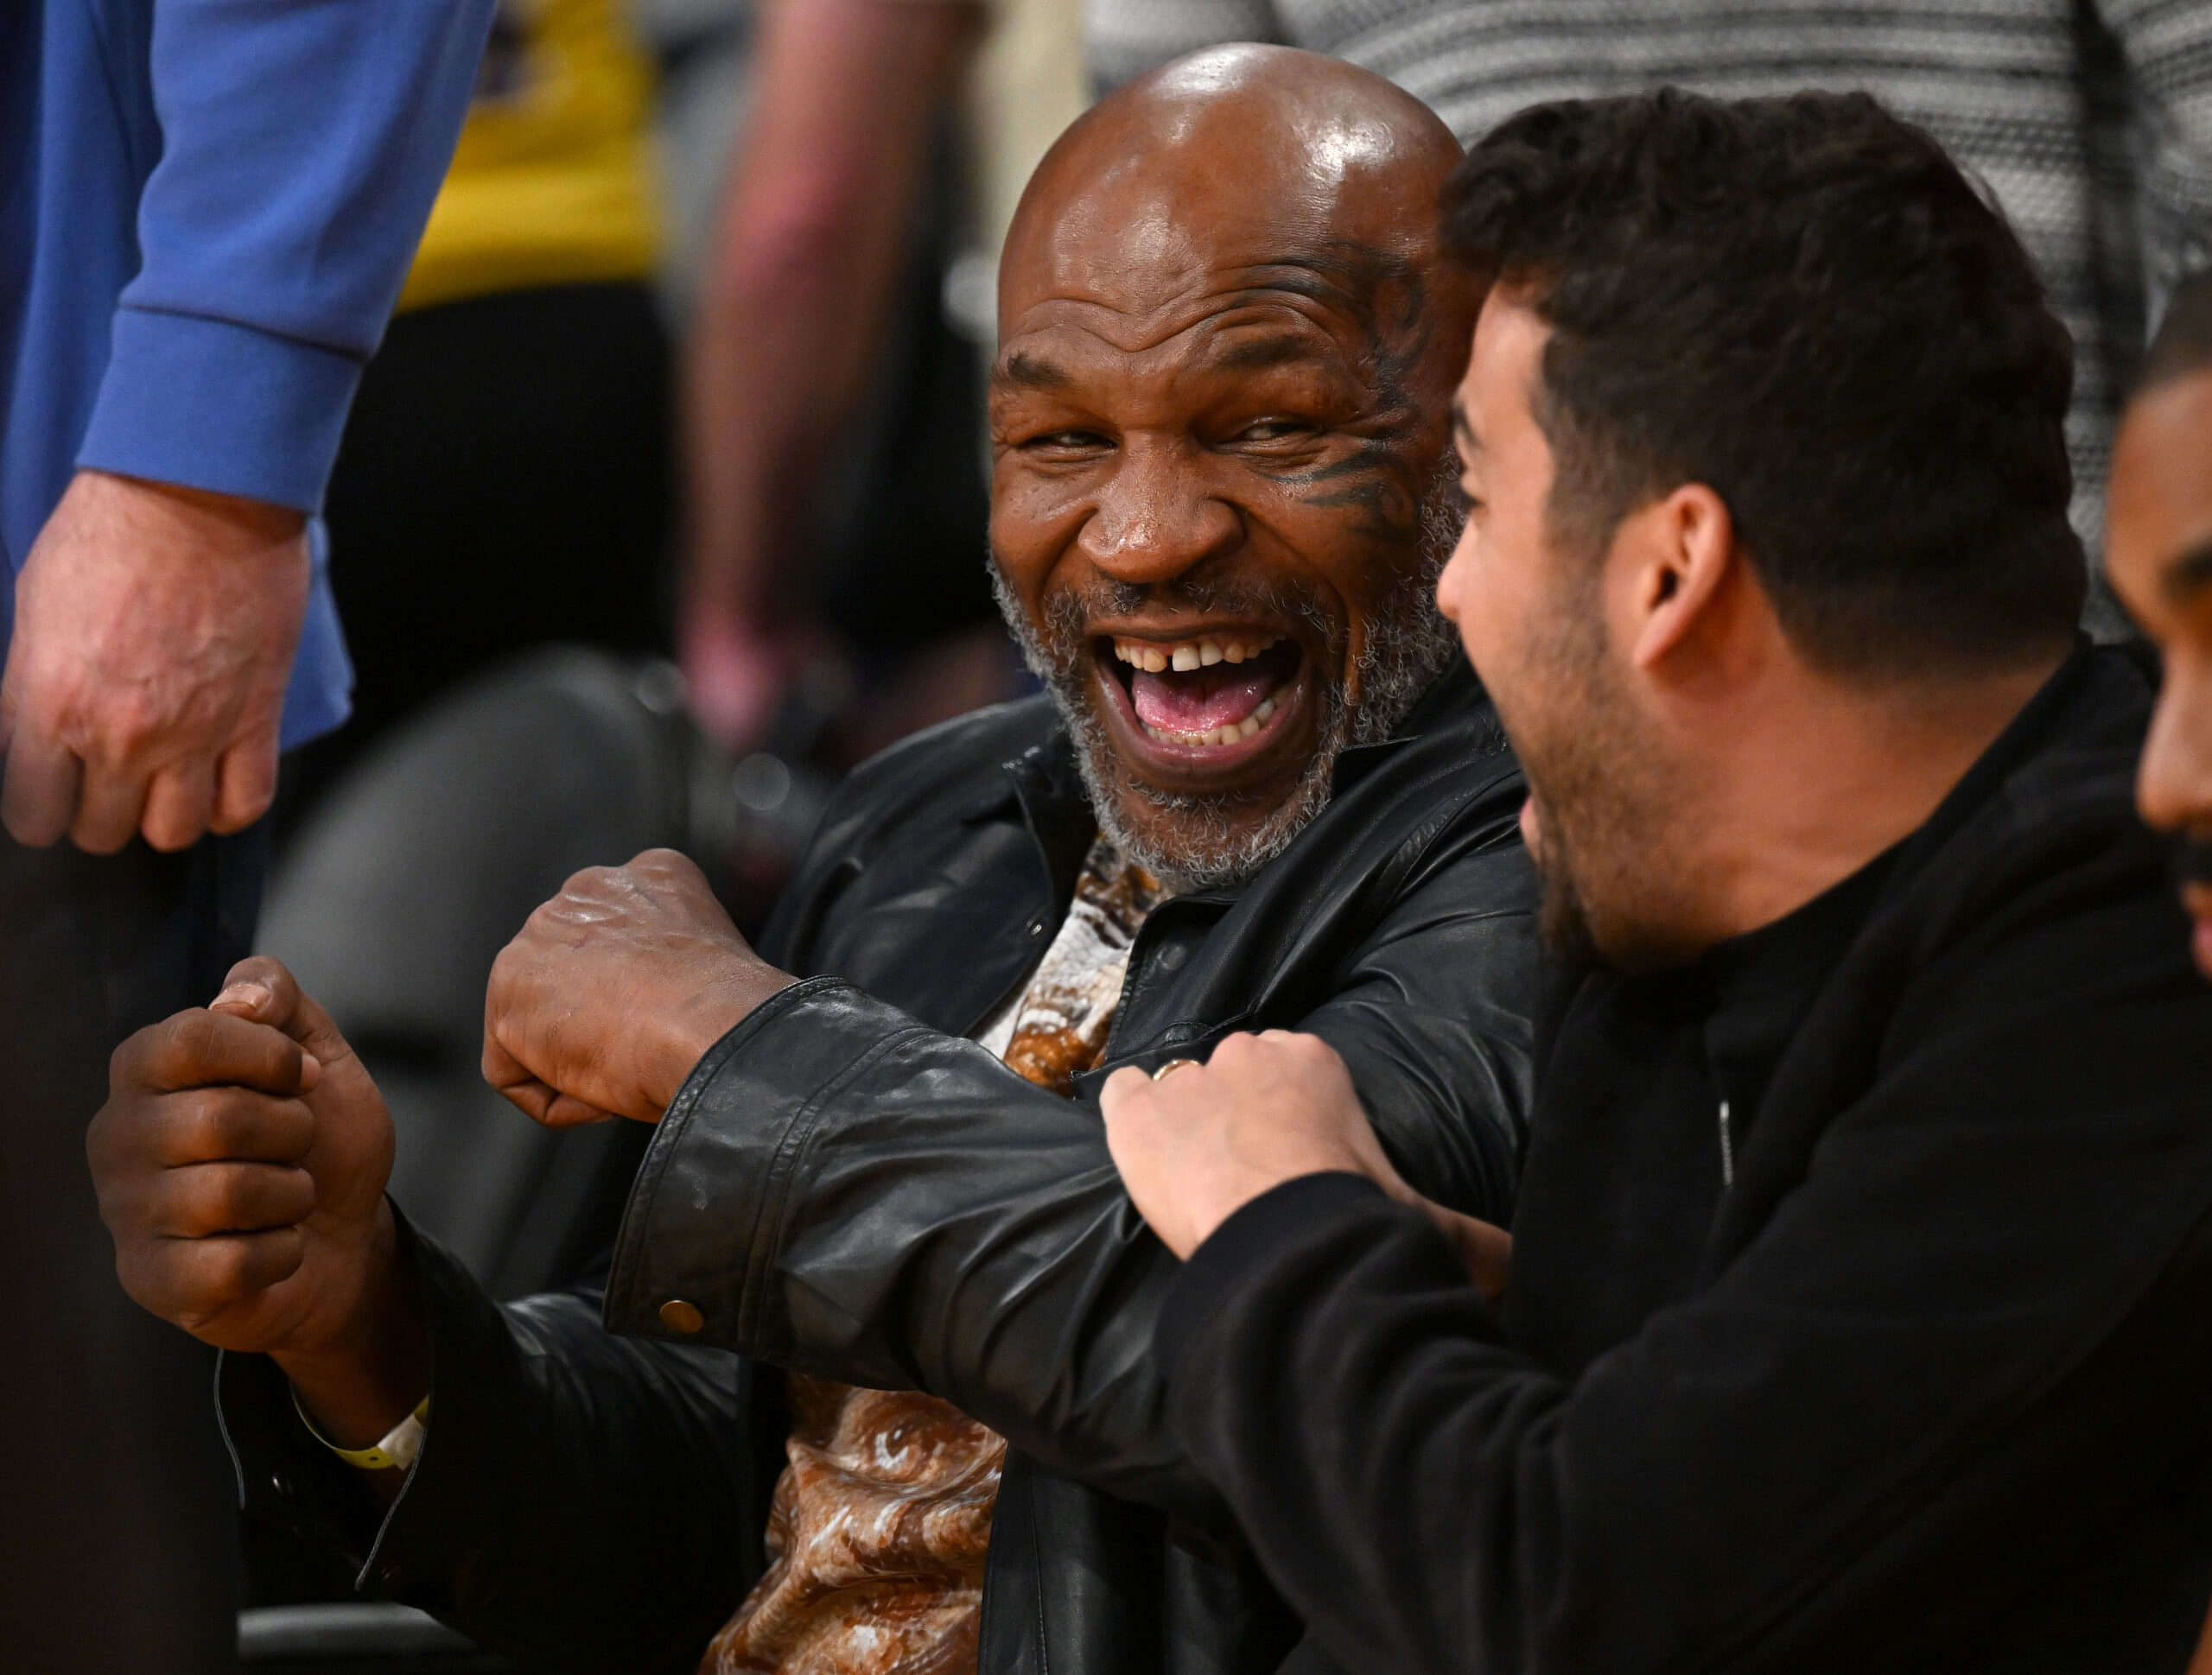 Once Broke Mike Tyson, Wanted a ‘10 Day Contract’ in $3,500,000,000 Worth NBA Club